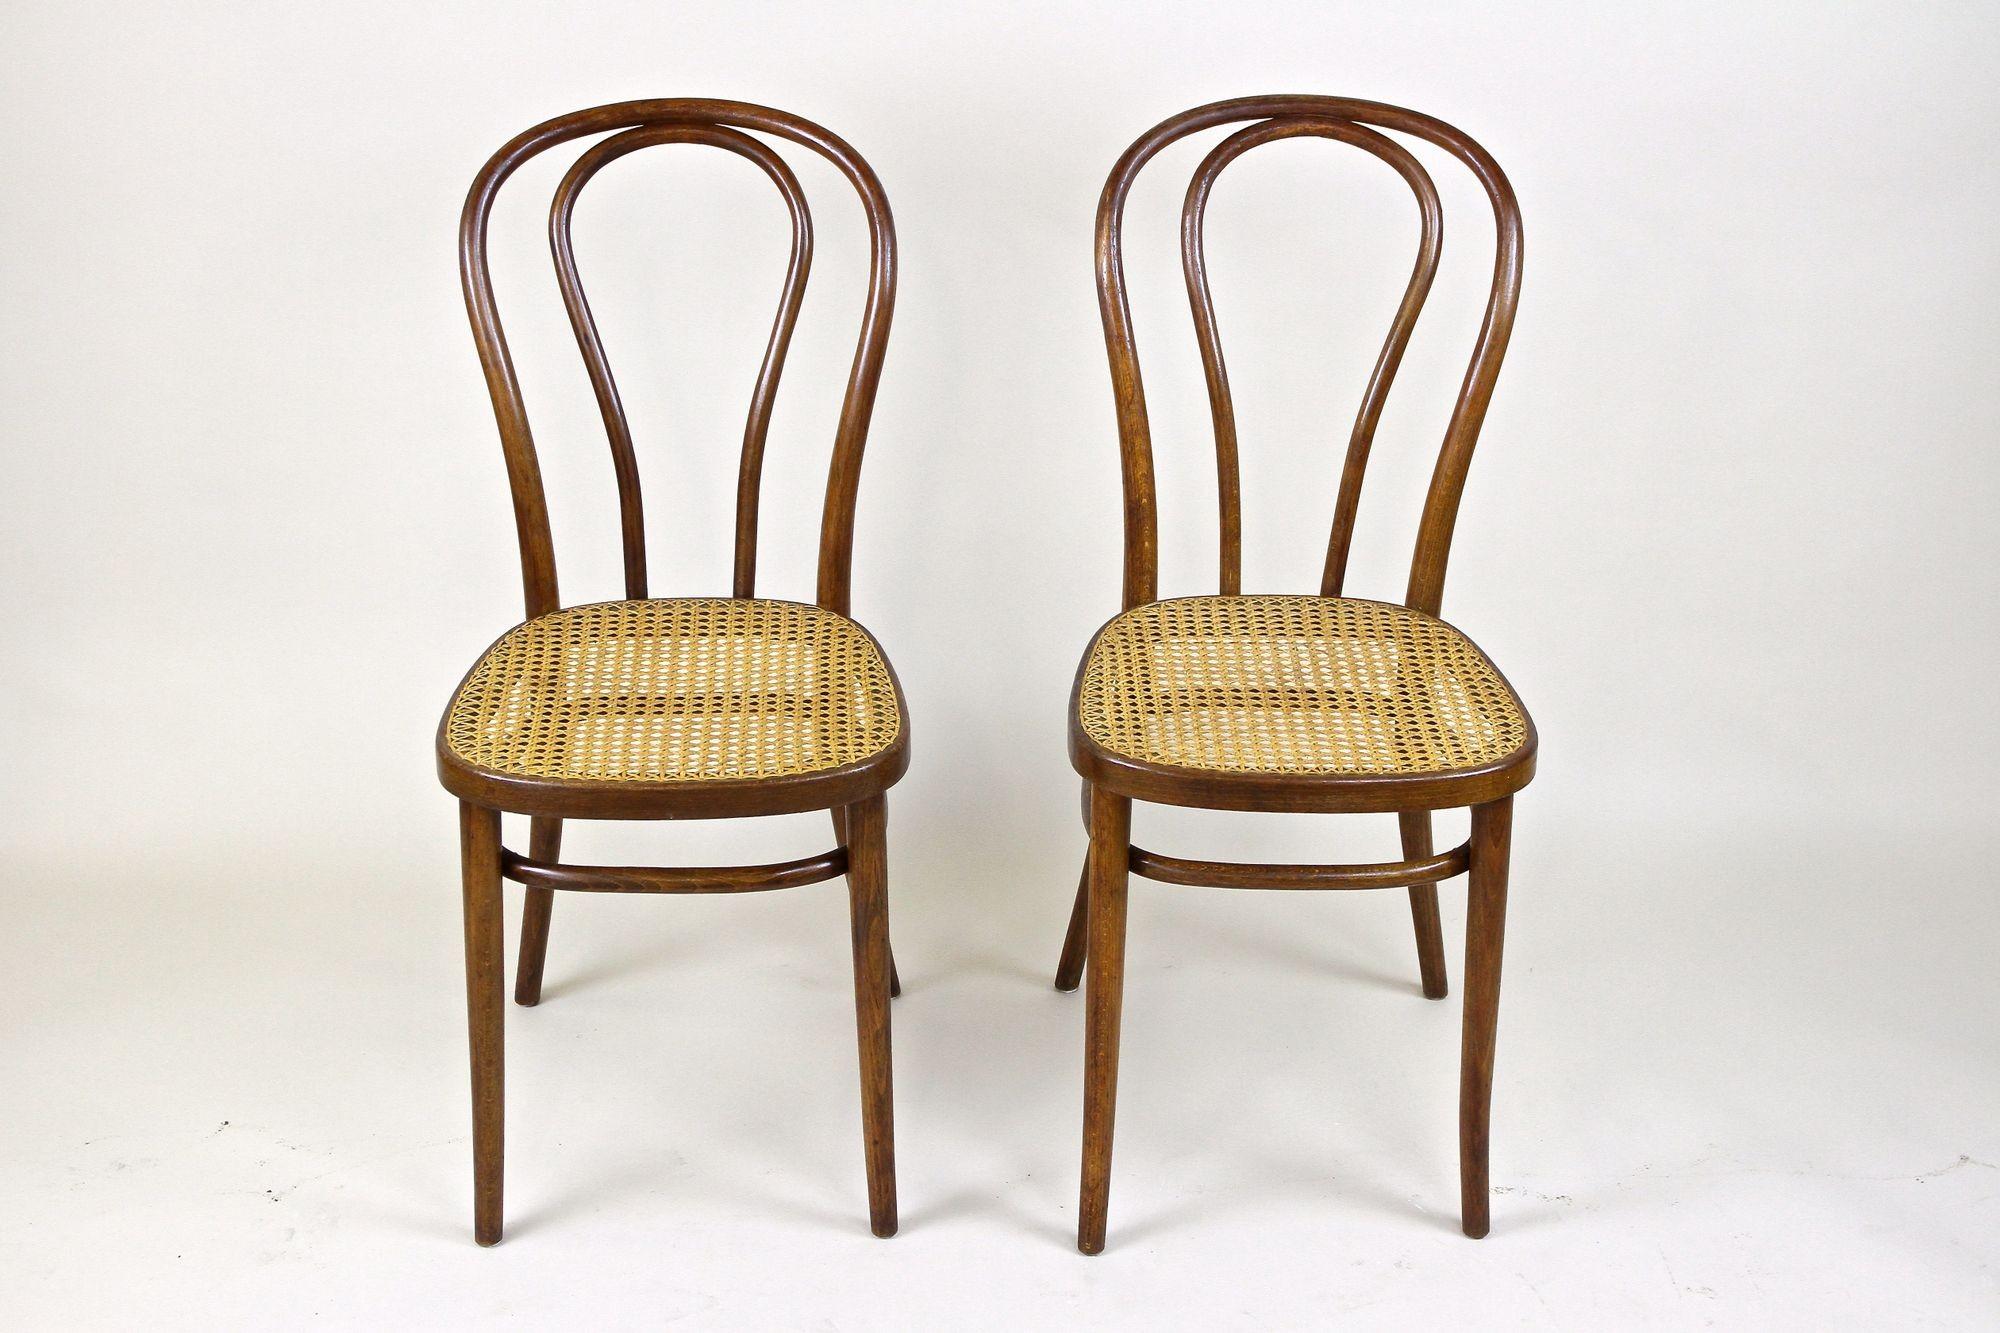 Elegant set of two bentwood chairs made by the renown company of Thonet in Vienna/ Austria in the era around 1890. These beautiful Art Nouveau chairs from the earlier period are the famous Thonet coffeehouse chairs model No. 14. Created out of fine